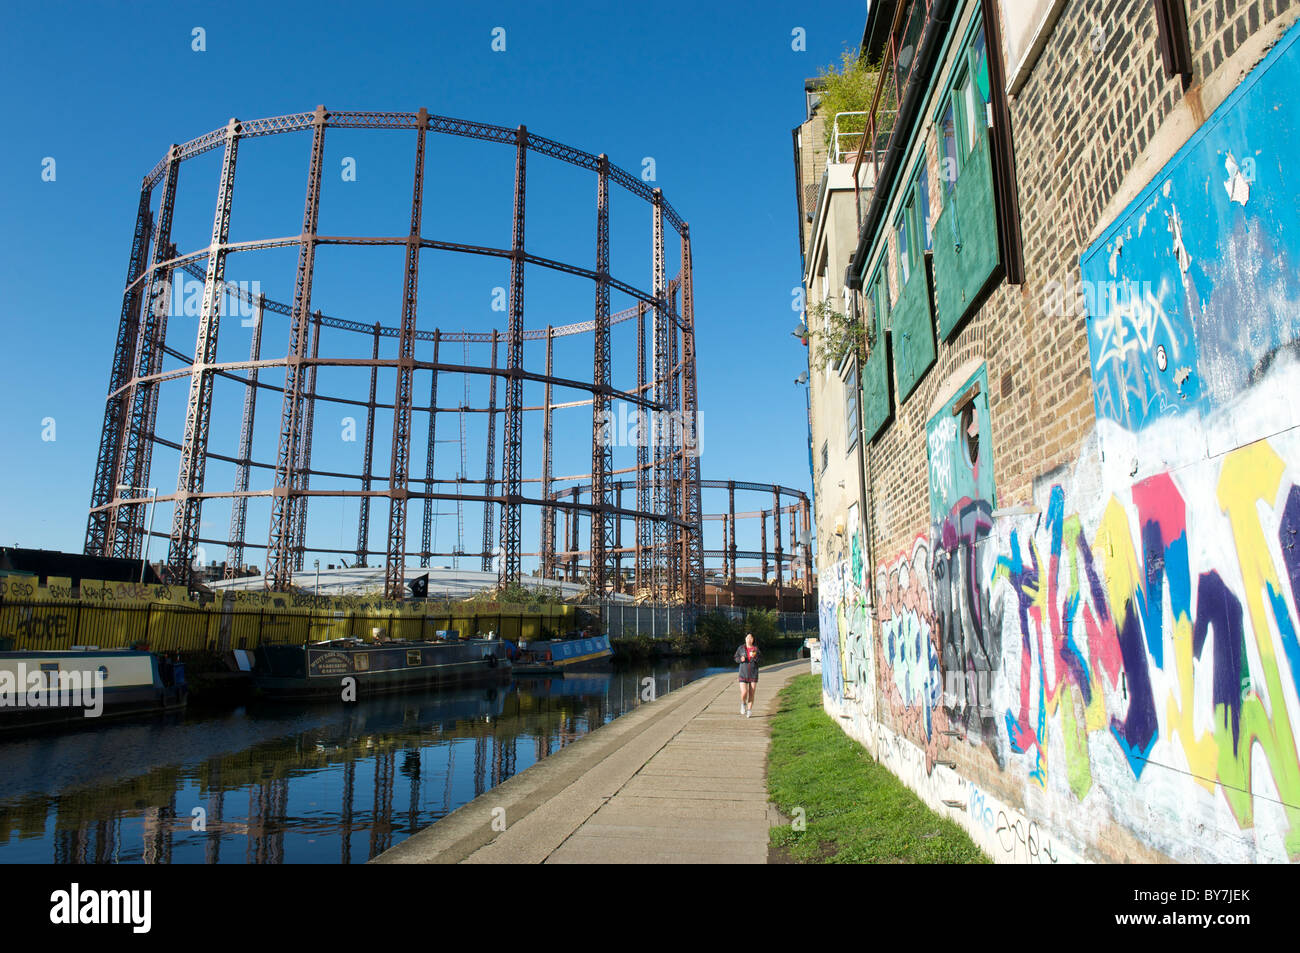 Jogger along Regents canal tow path next to Haggerston gasworks Hackney London by Columbia Road market.  Graffiti on wall. Stock Photo